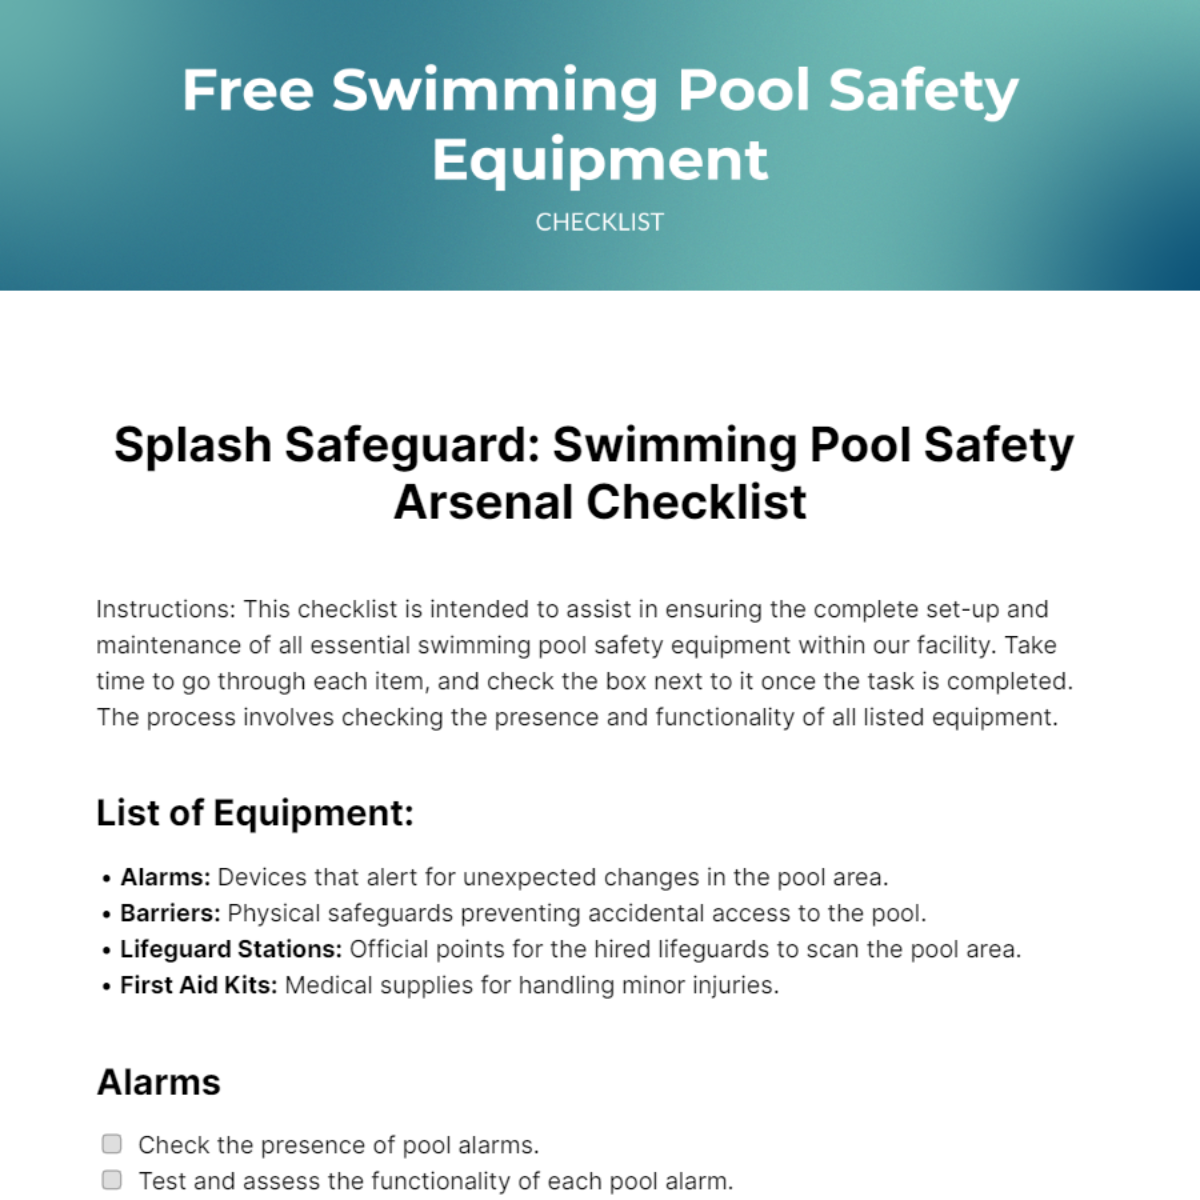 Free Swimming Pool Safety Equipment Checklist Template